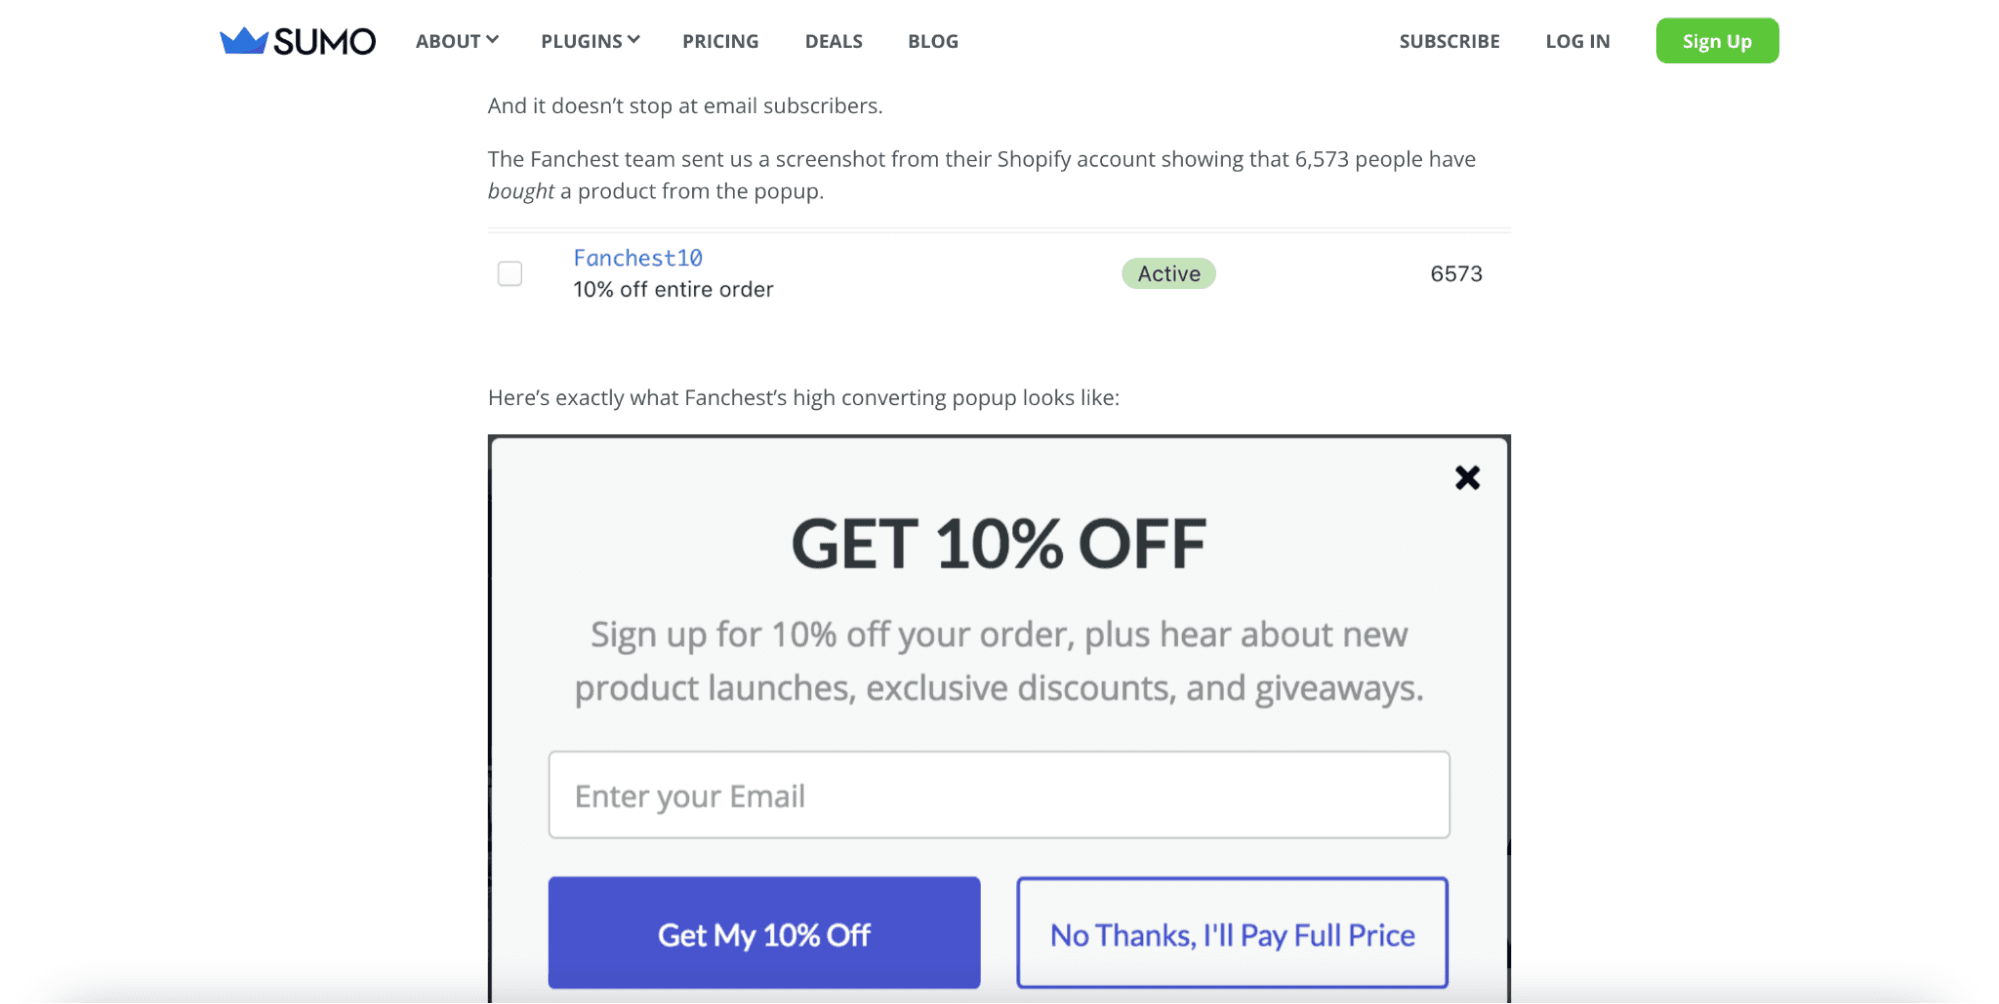 A screenshot from Sumo's case study, displaying the "Get 10% Off" pop up ad that customers were presented.